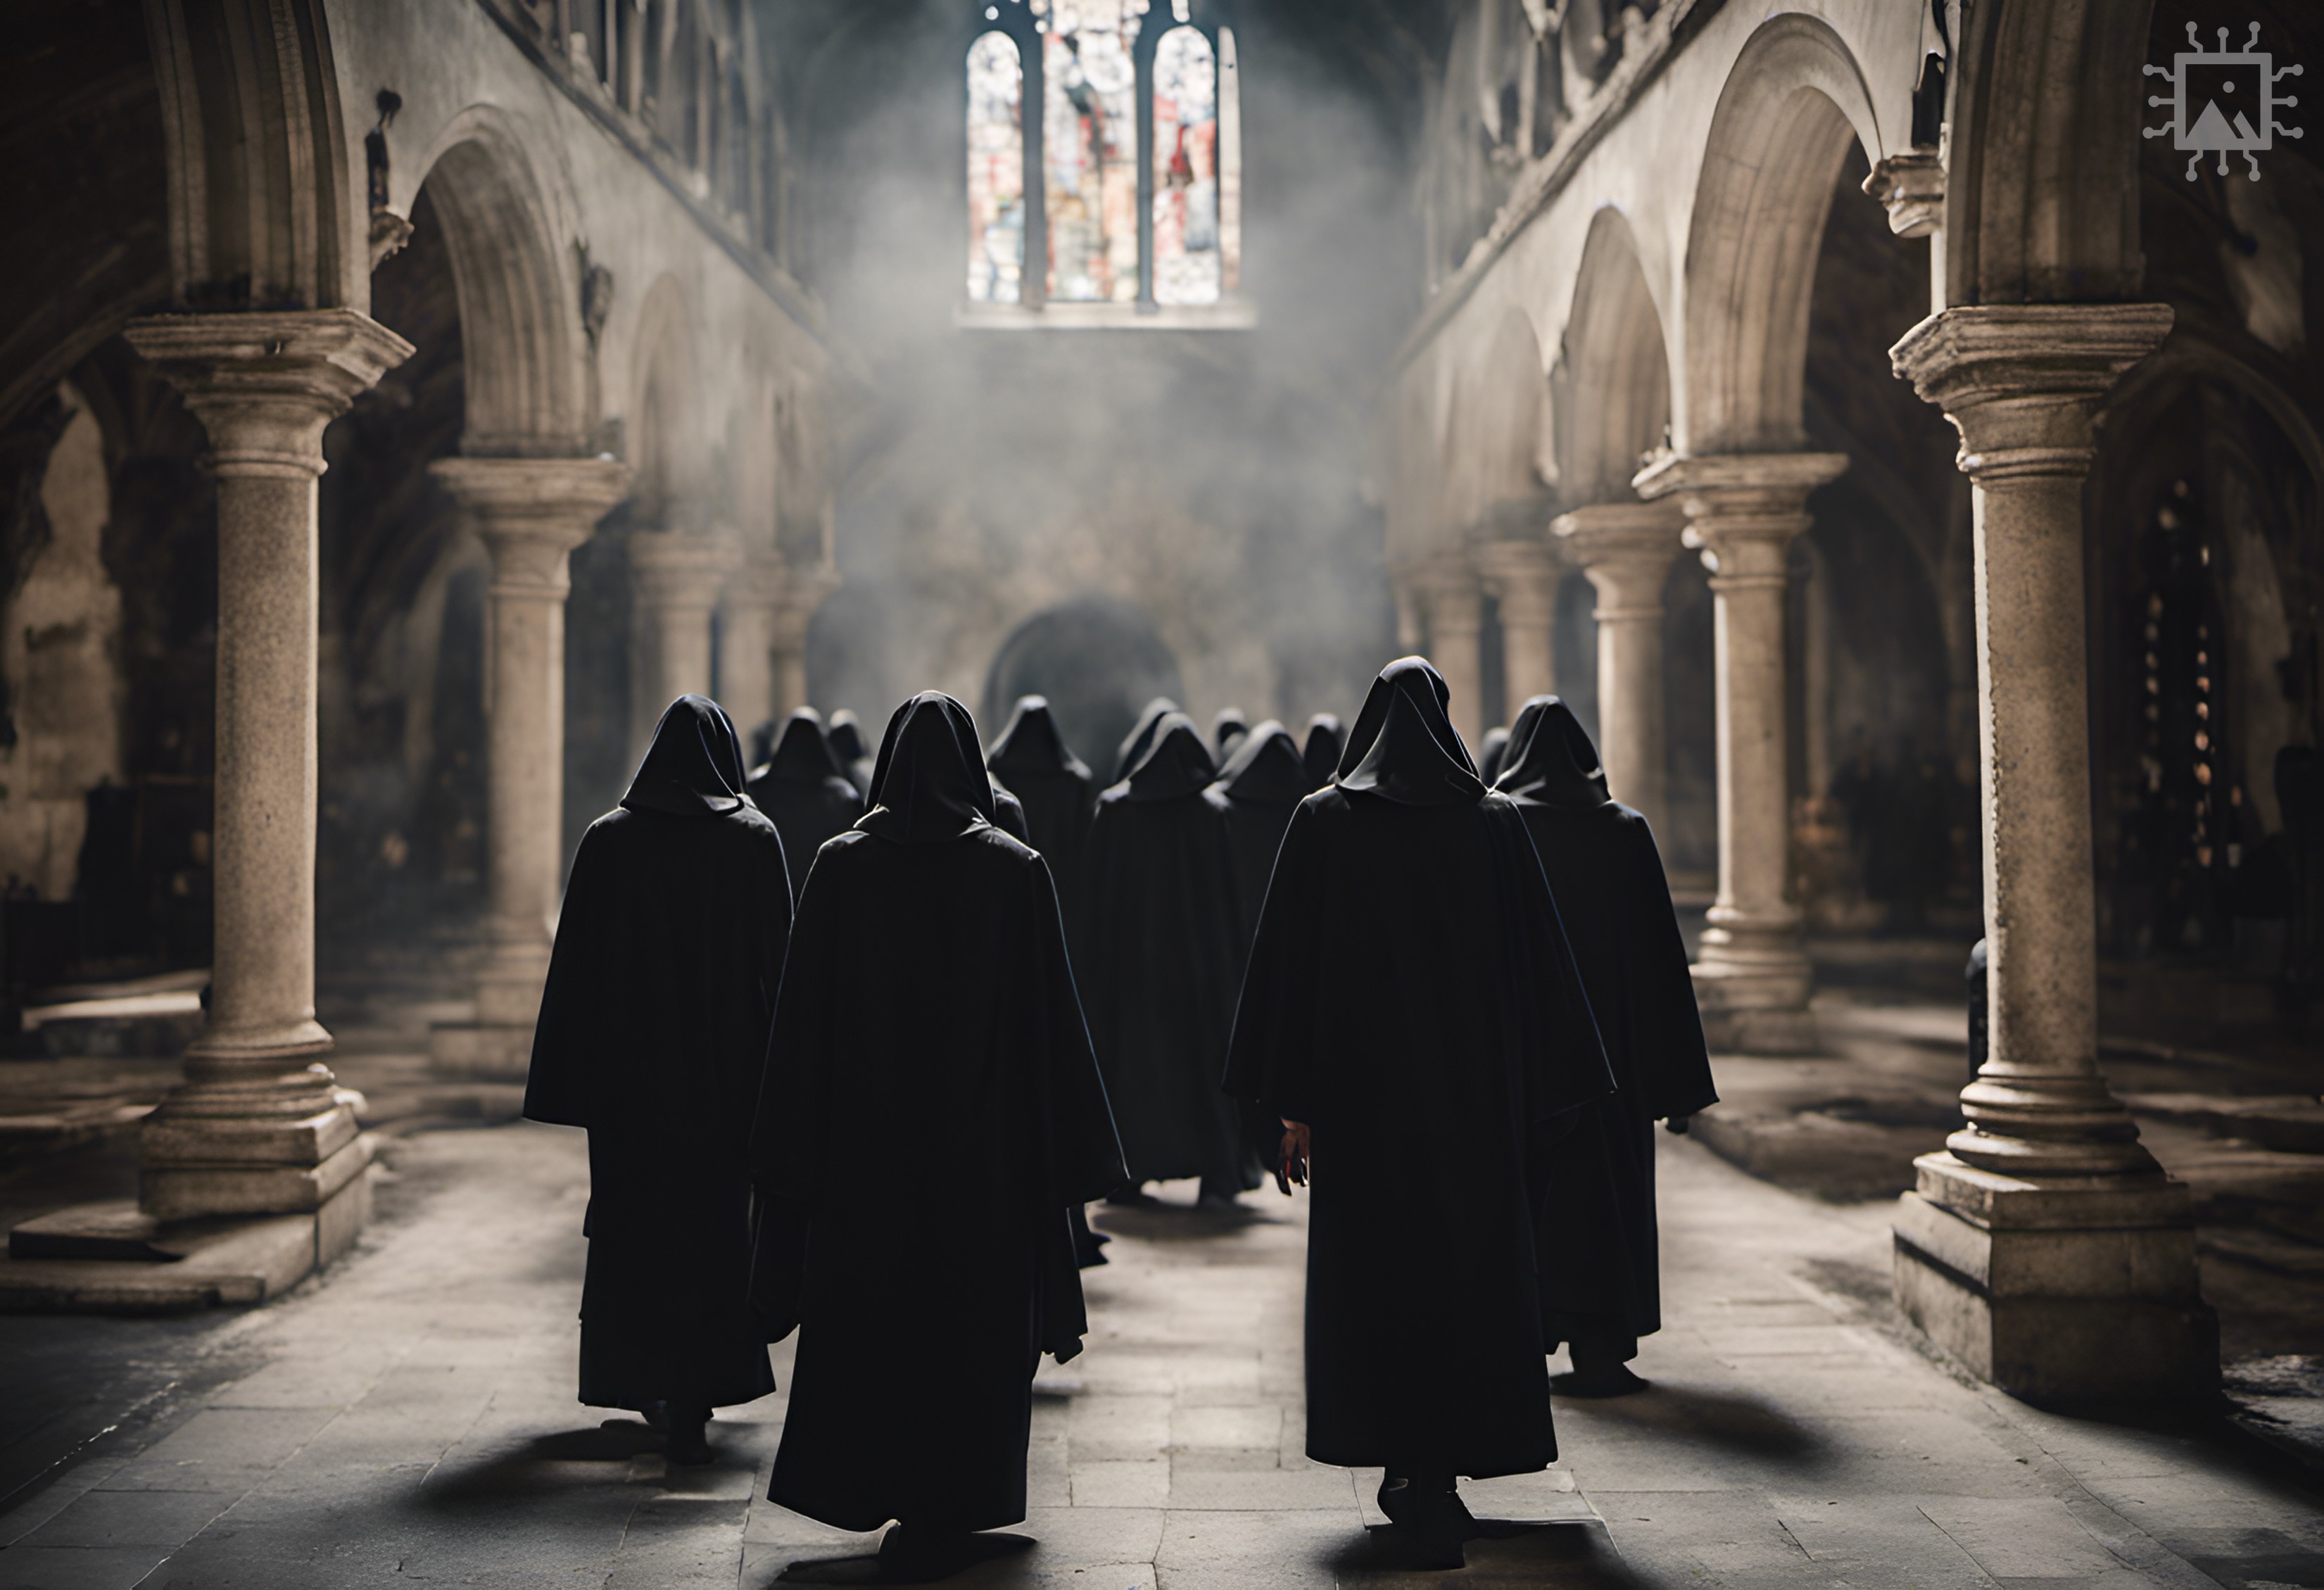 Artificial Intelligence-generated image produced using DreamStudio [accessed 20-09-2023]: ‘A large group of clean-shaven medieval Benedictine monks in black robes in a church cloister.’ Find out more: rochestercathedral.org/research/ai